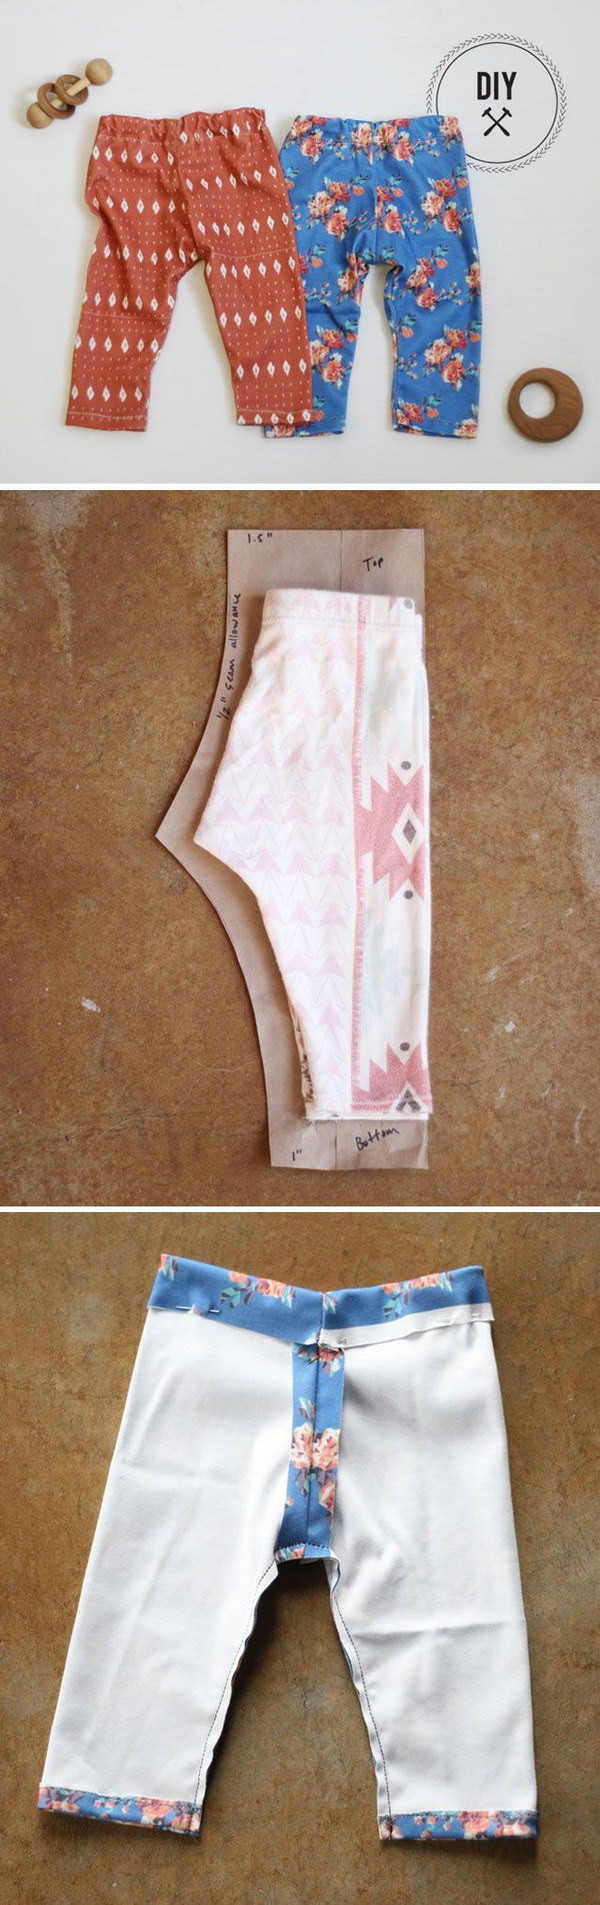 DIY Baby Leggings
 60 Simple & Cute Things Gifts You Can DIY For A Baby